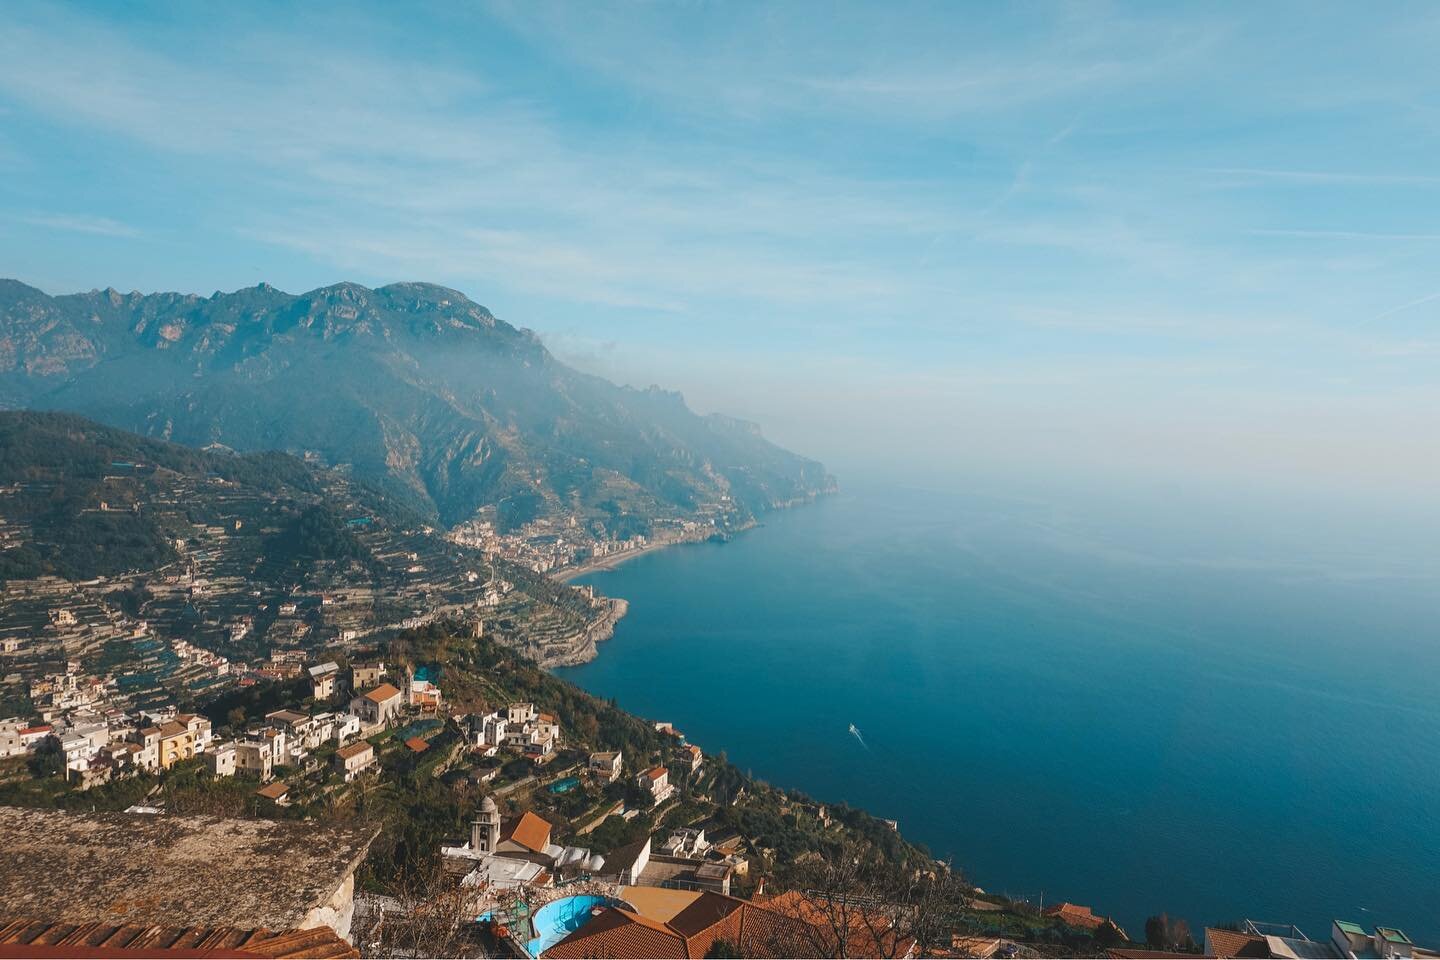 &quot;Certainly, travel is more than the seeing of sights; it is a change that goes on, deep and permanent, in the ideas of living.&quot;
Mary Ritter Beard
*
*
*
*
*
*
*
#ravello #italylovers #amalficoastitaly #ilikeitaly#enjoythecoast #mare #villaci